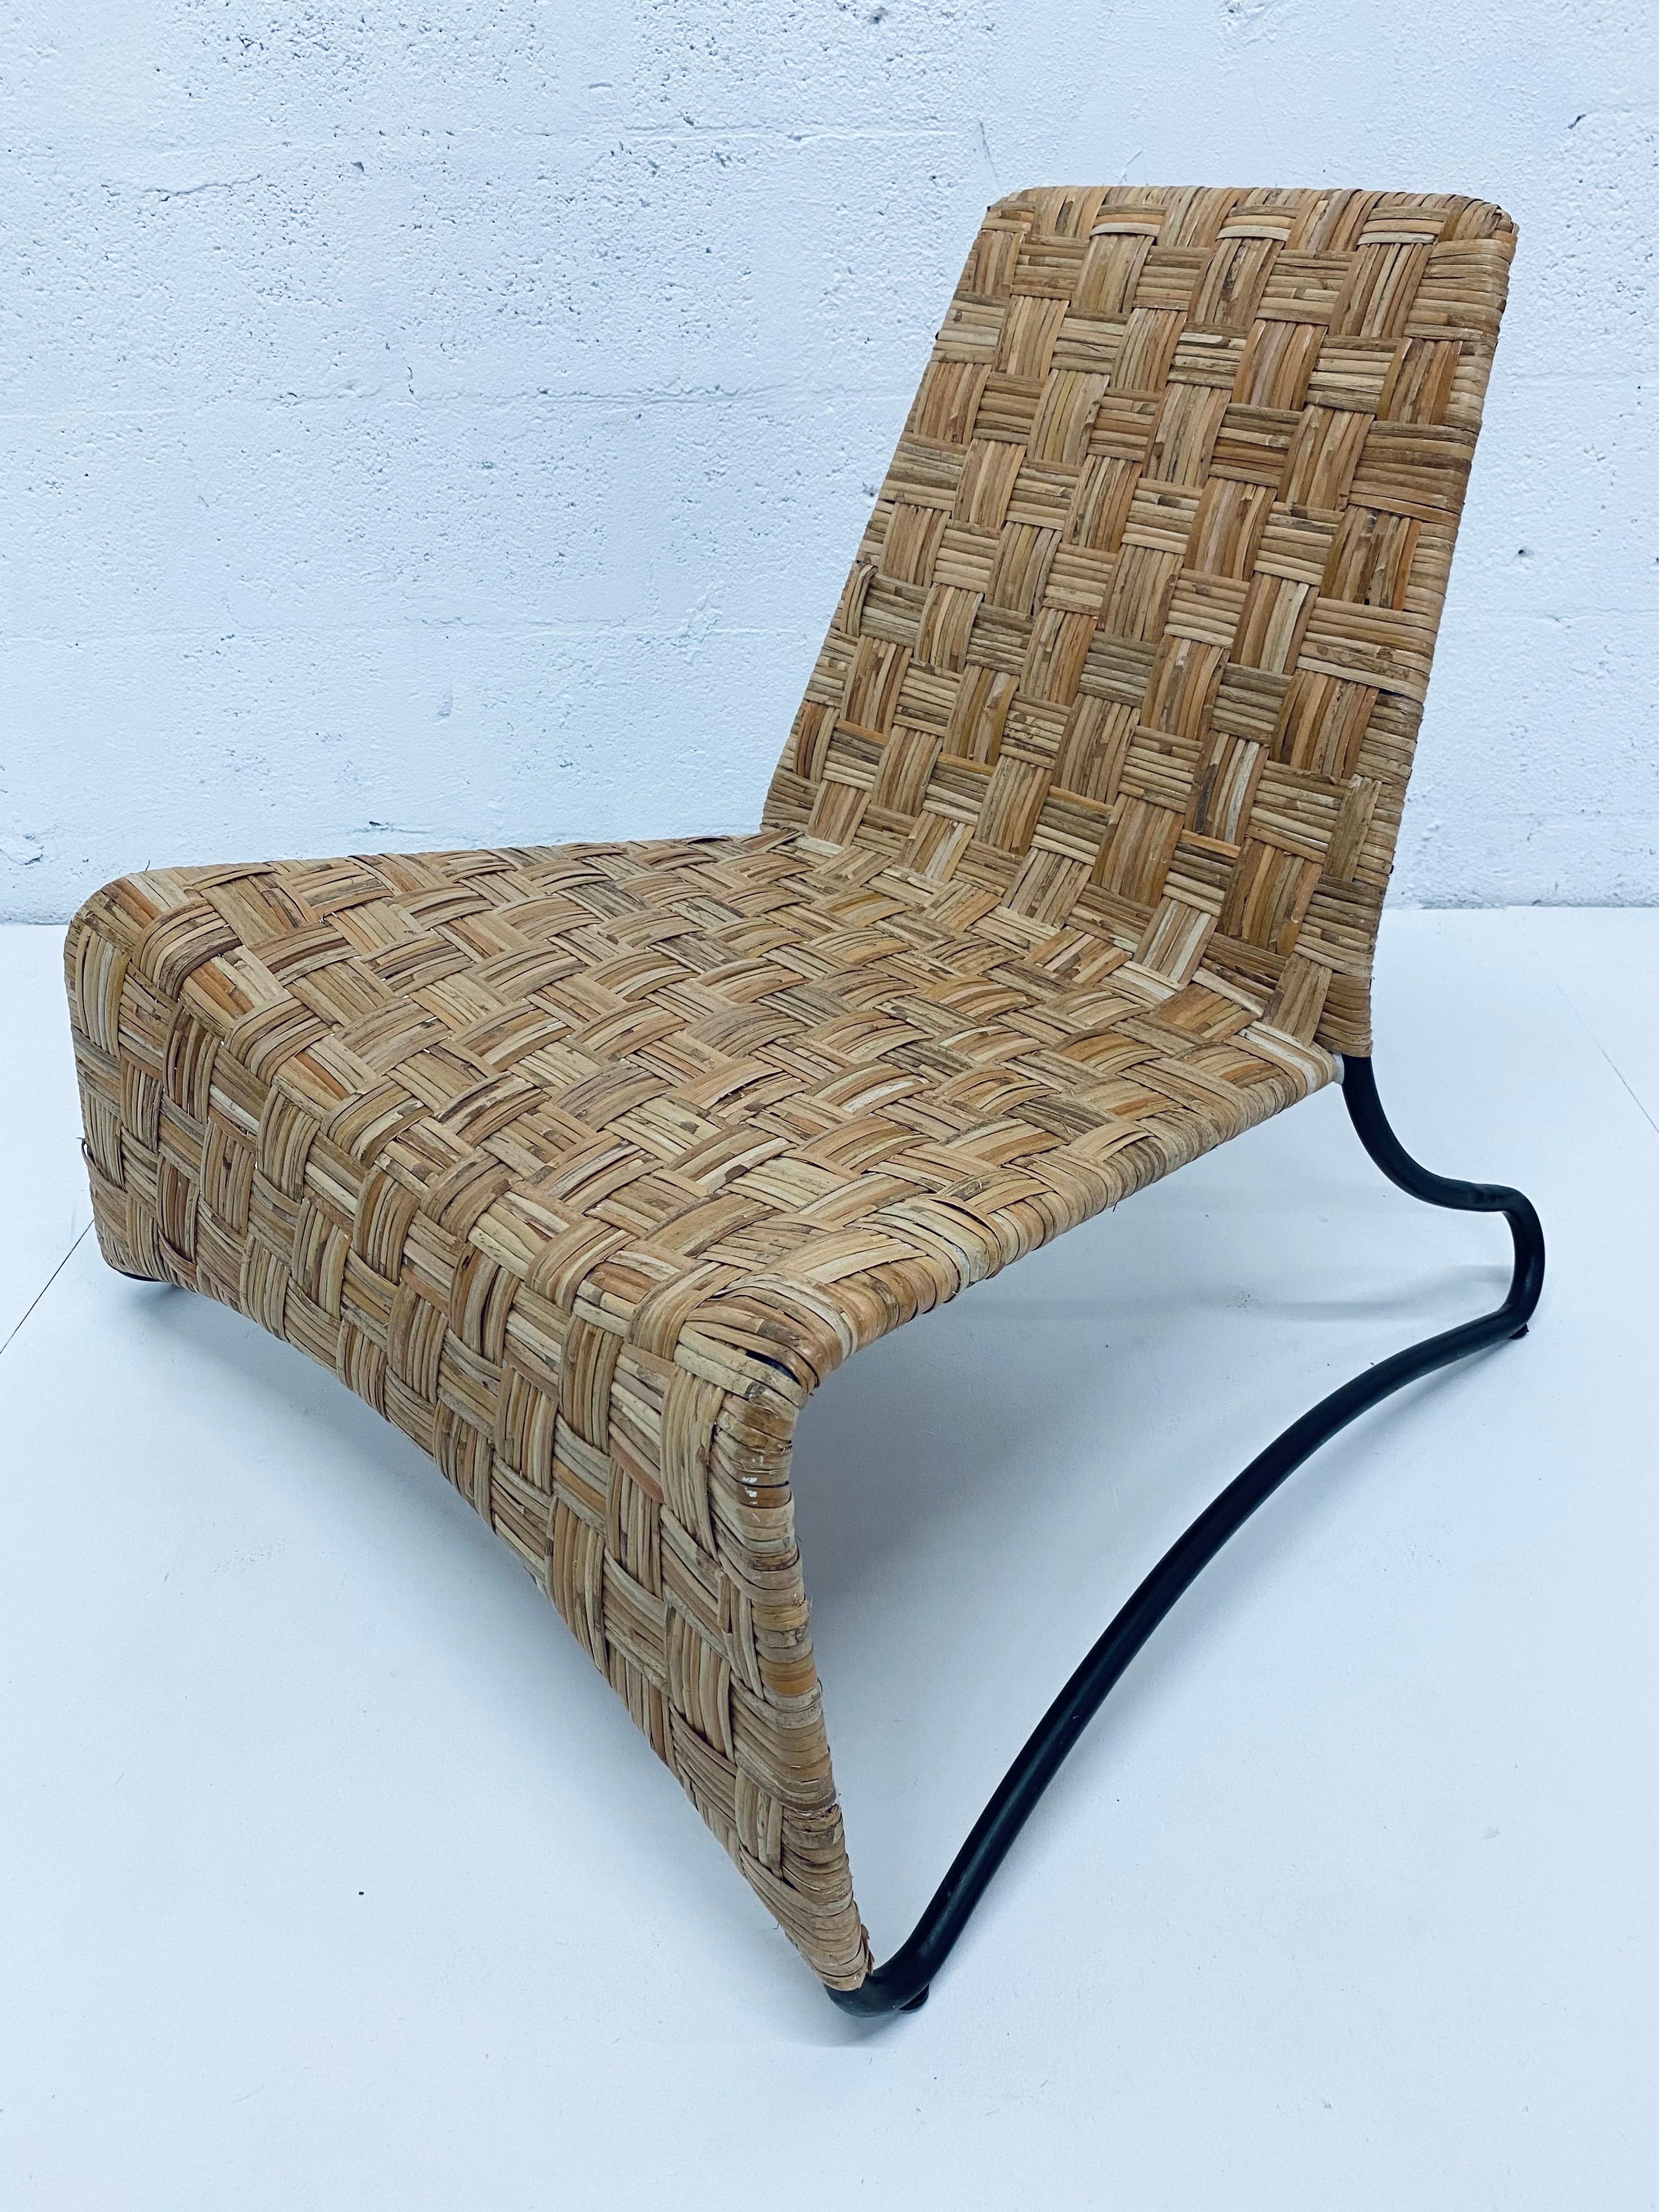 Midcentury Woven Rattan Lounge Chair with Black Tubular Frame 1